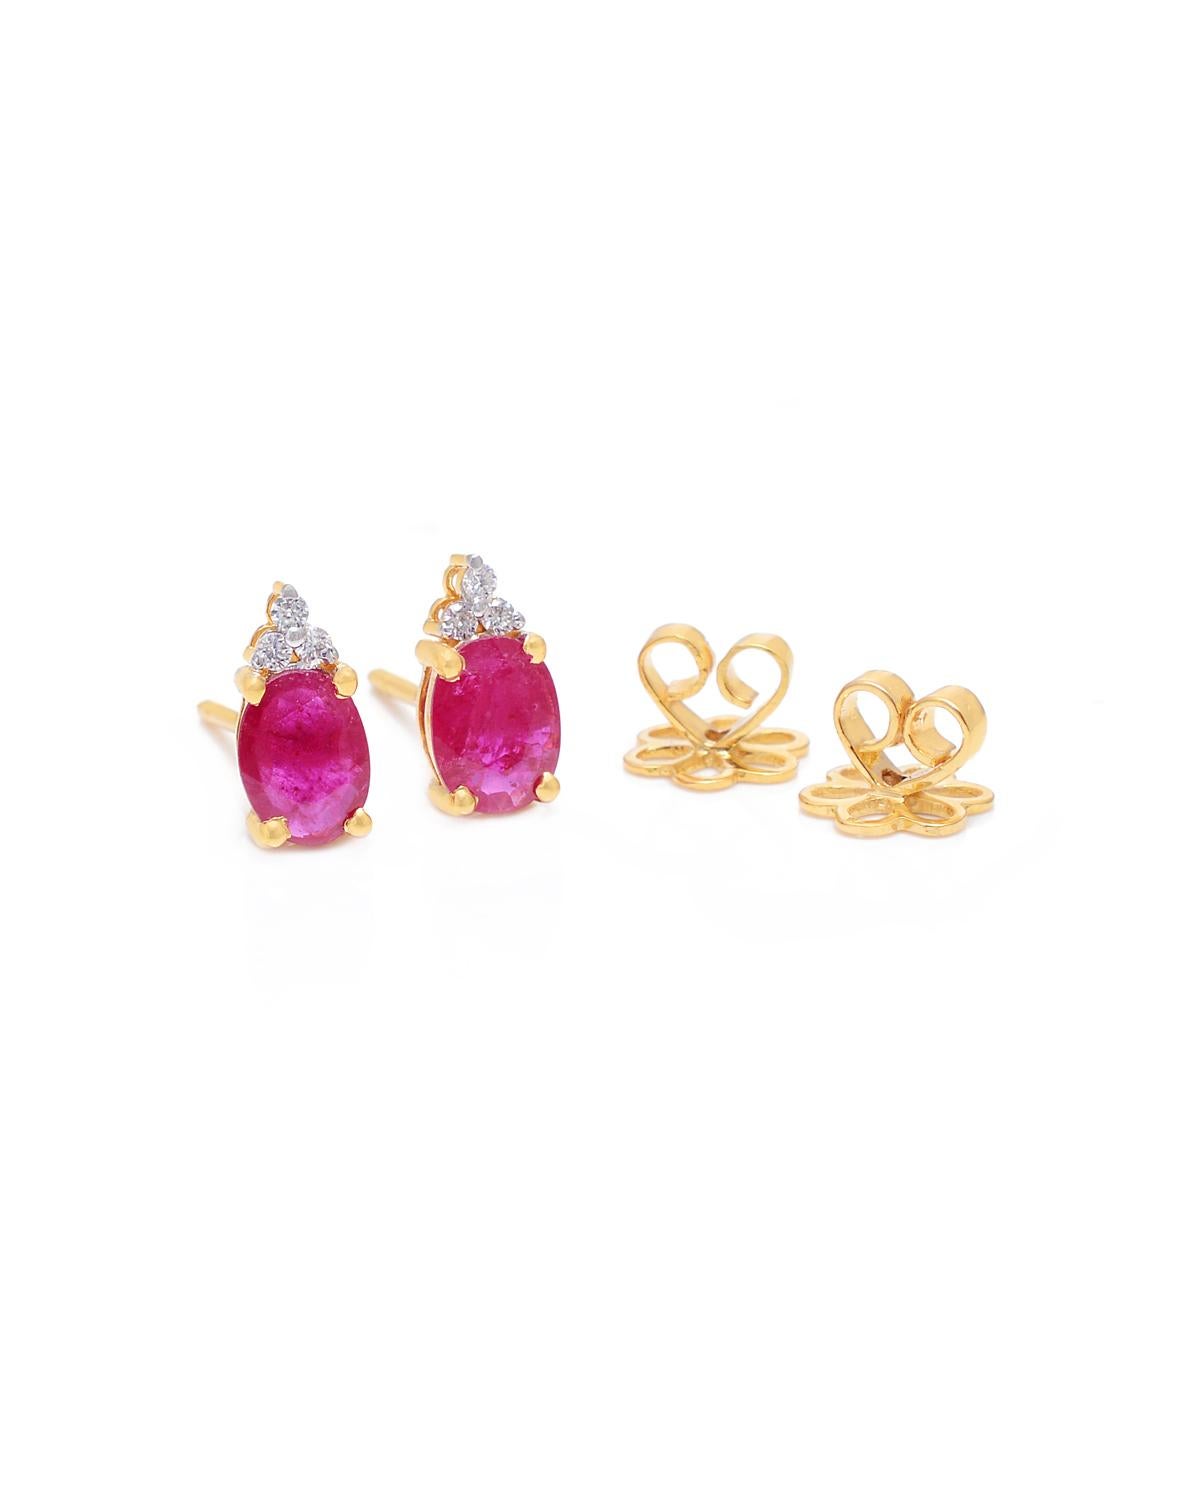 These earrings are made with genuine ruby gemstones and diamonds. They are set in 14K gold. These earrings are perfect for any occasion and make a great addition to any jewelry collection.

Specifications

Dimensions: 
Gross Weight: 2.11 grams
Gold